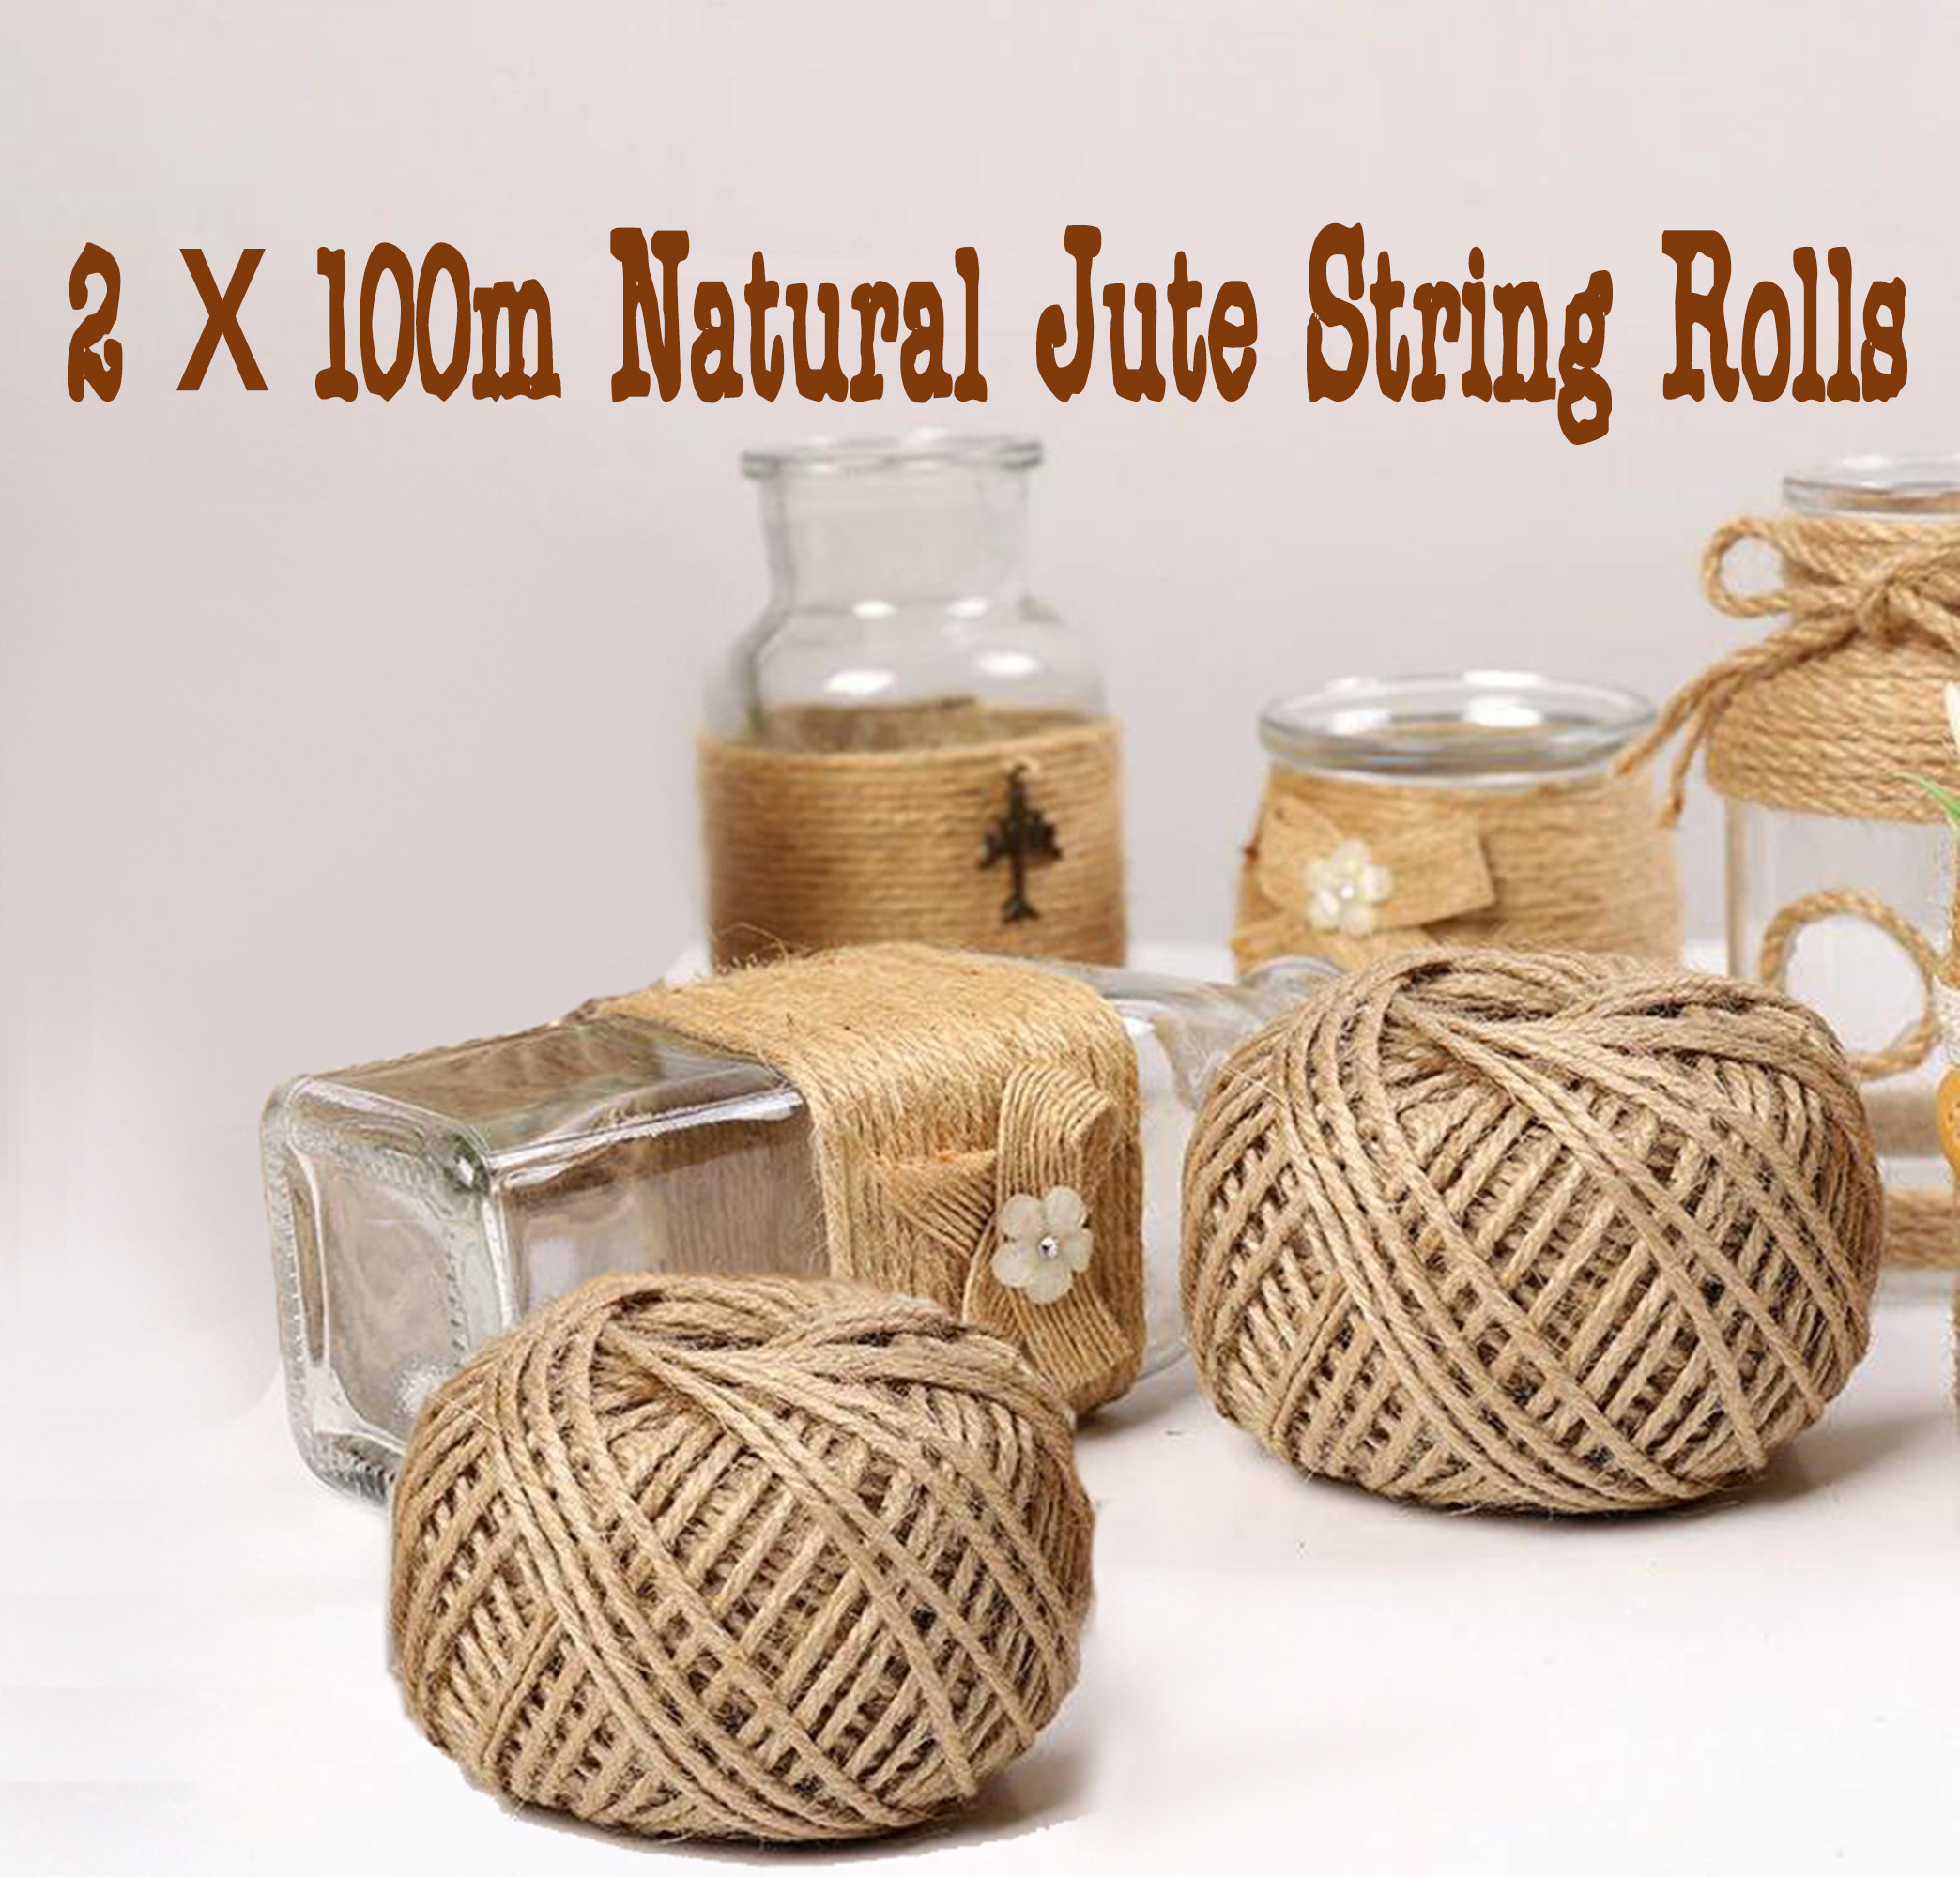 2 X 100m Natural Brown Jute Thread Rustic Hessian Twine String Hemp Rope  Cord Bundle for Garden Decoration, Wrapping Gifts, Christmas Xmas